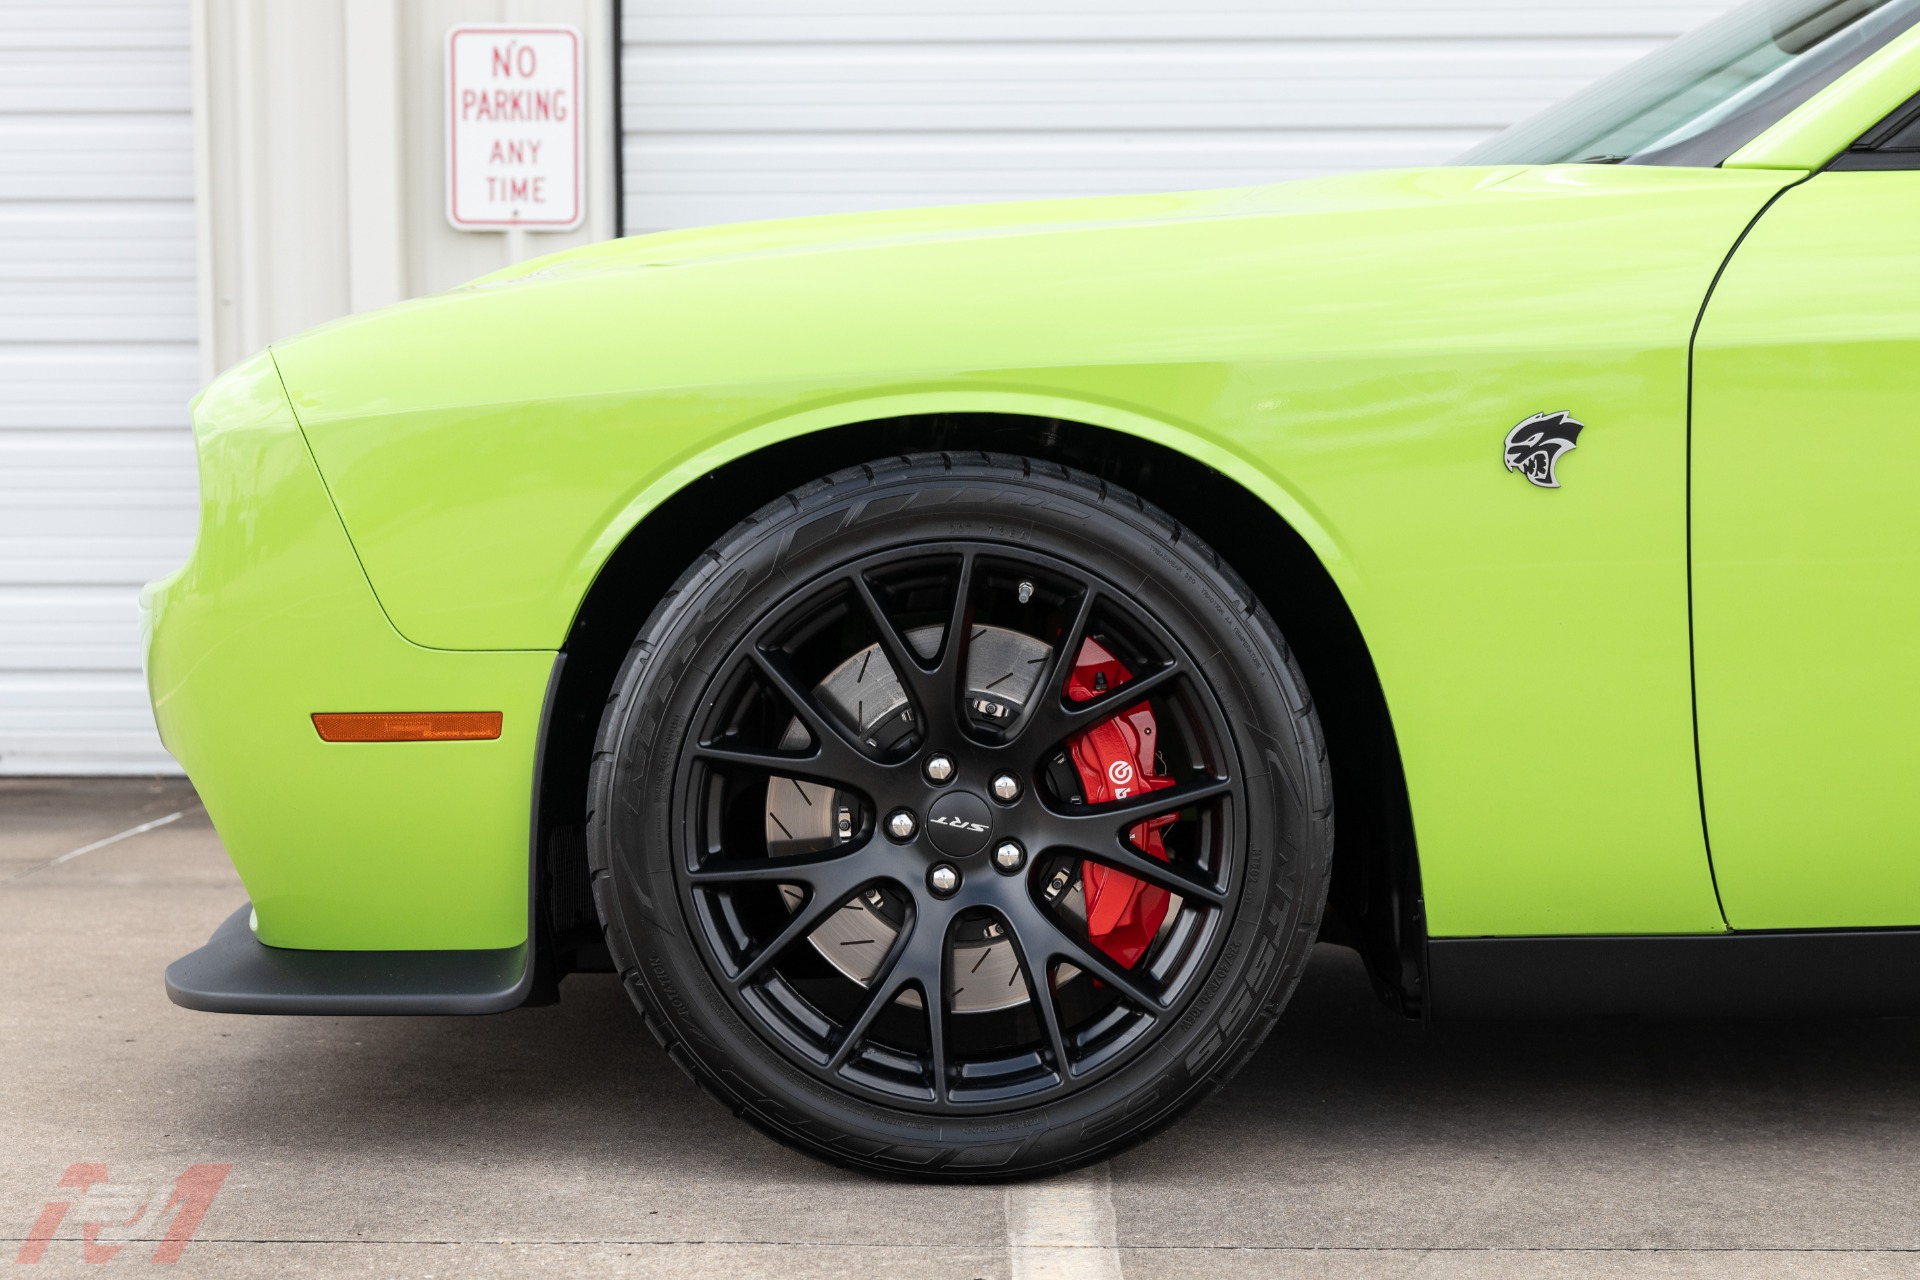 Used-2015-Dodge-Challenger-SRT-Hellcat-Whipple-Supercharged